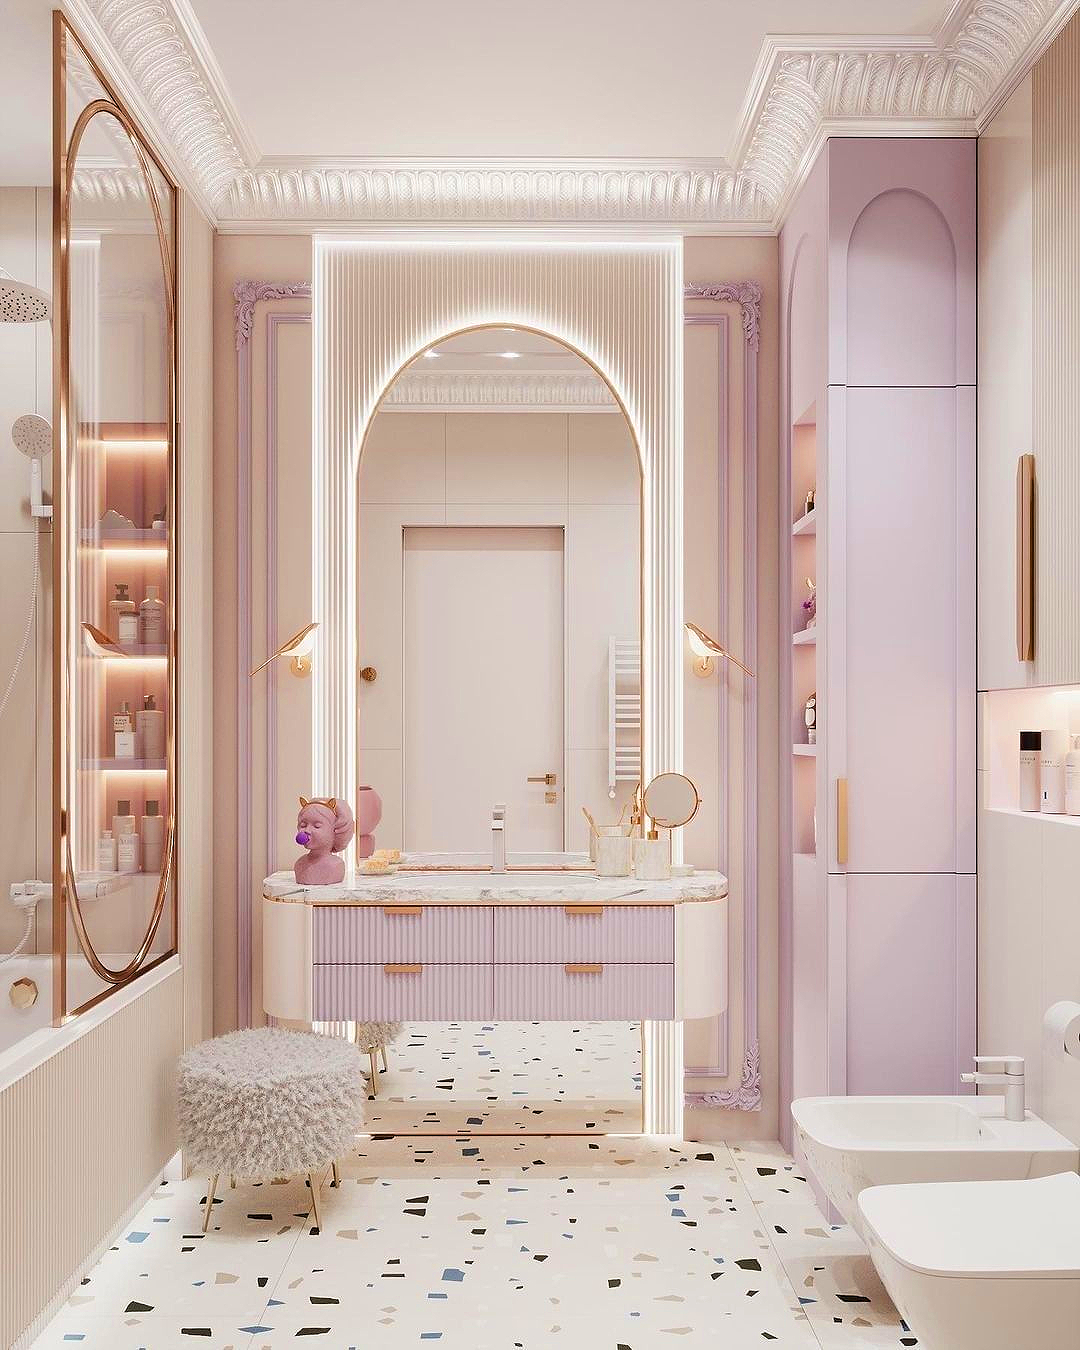 Project by Julia Baya - 10 Pink Bathroom Design Ideas That Will Leave You Astonished home inspiration ideas